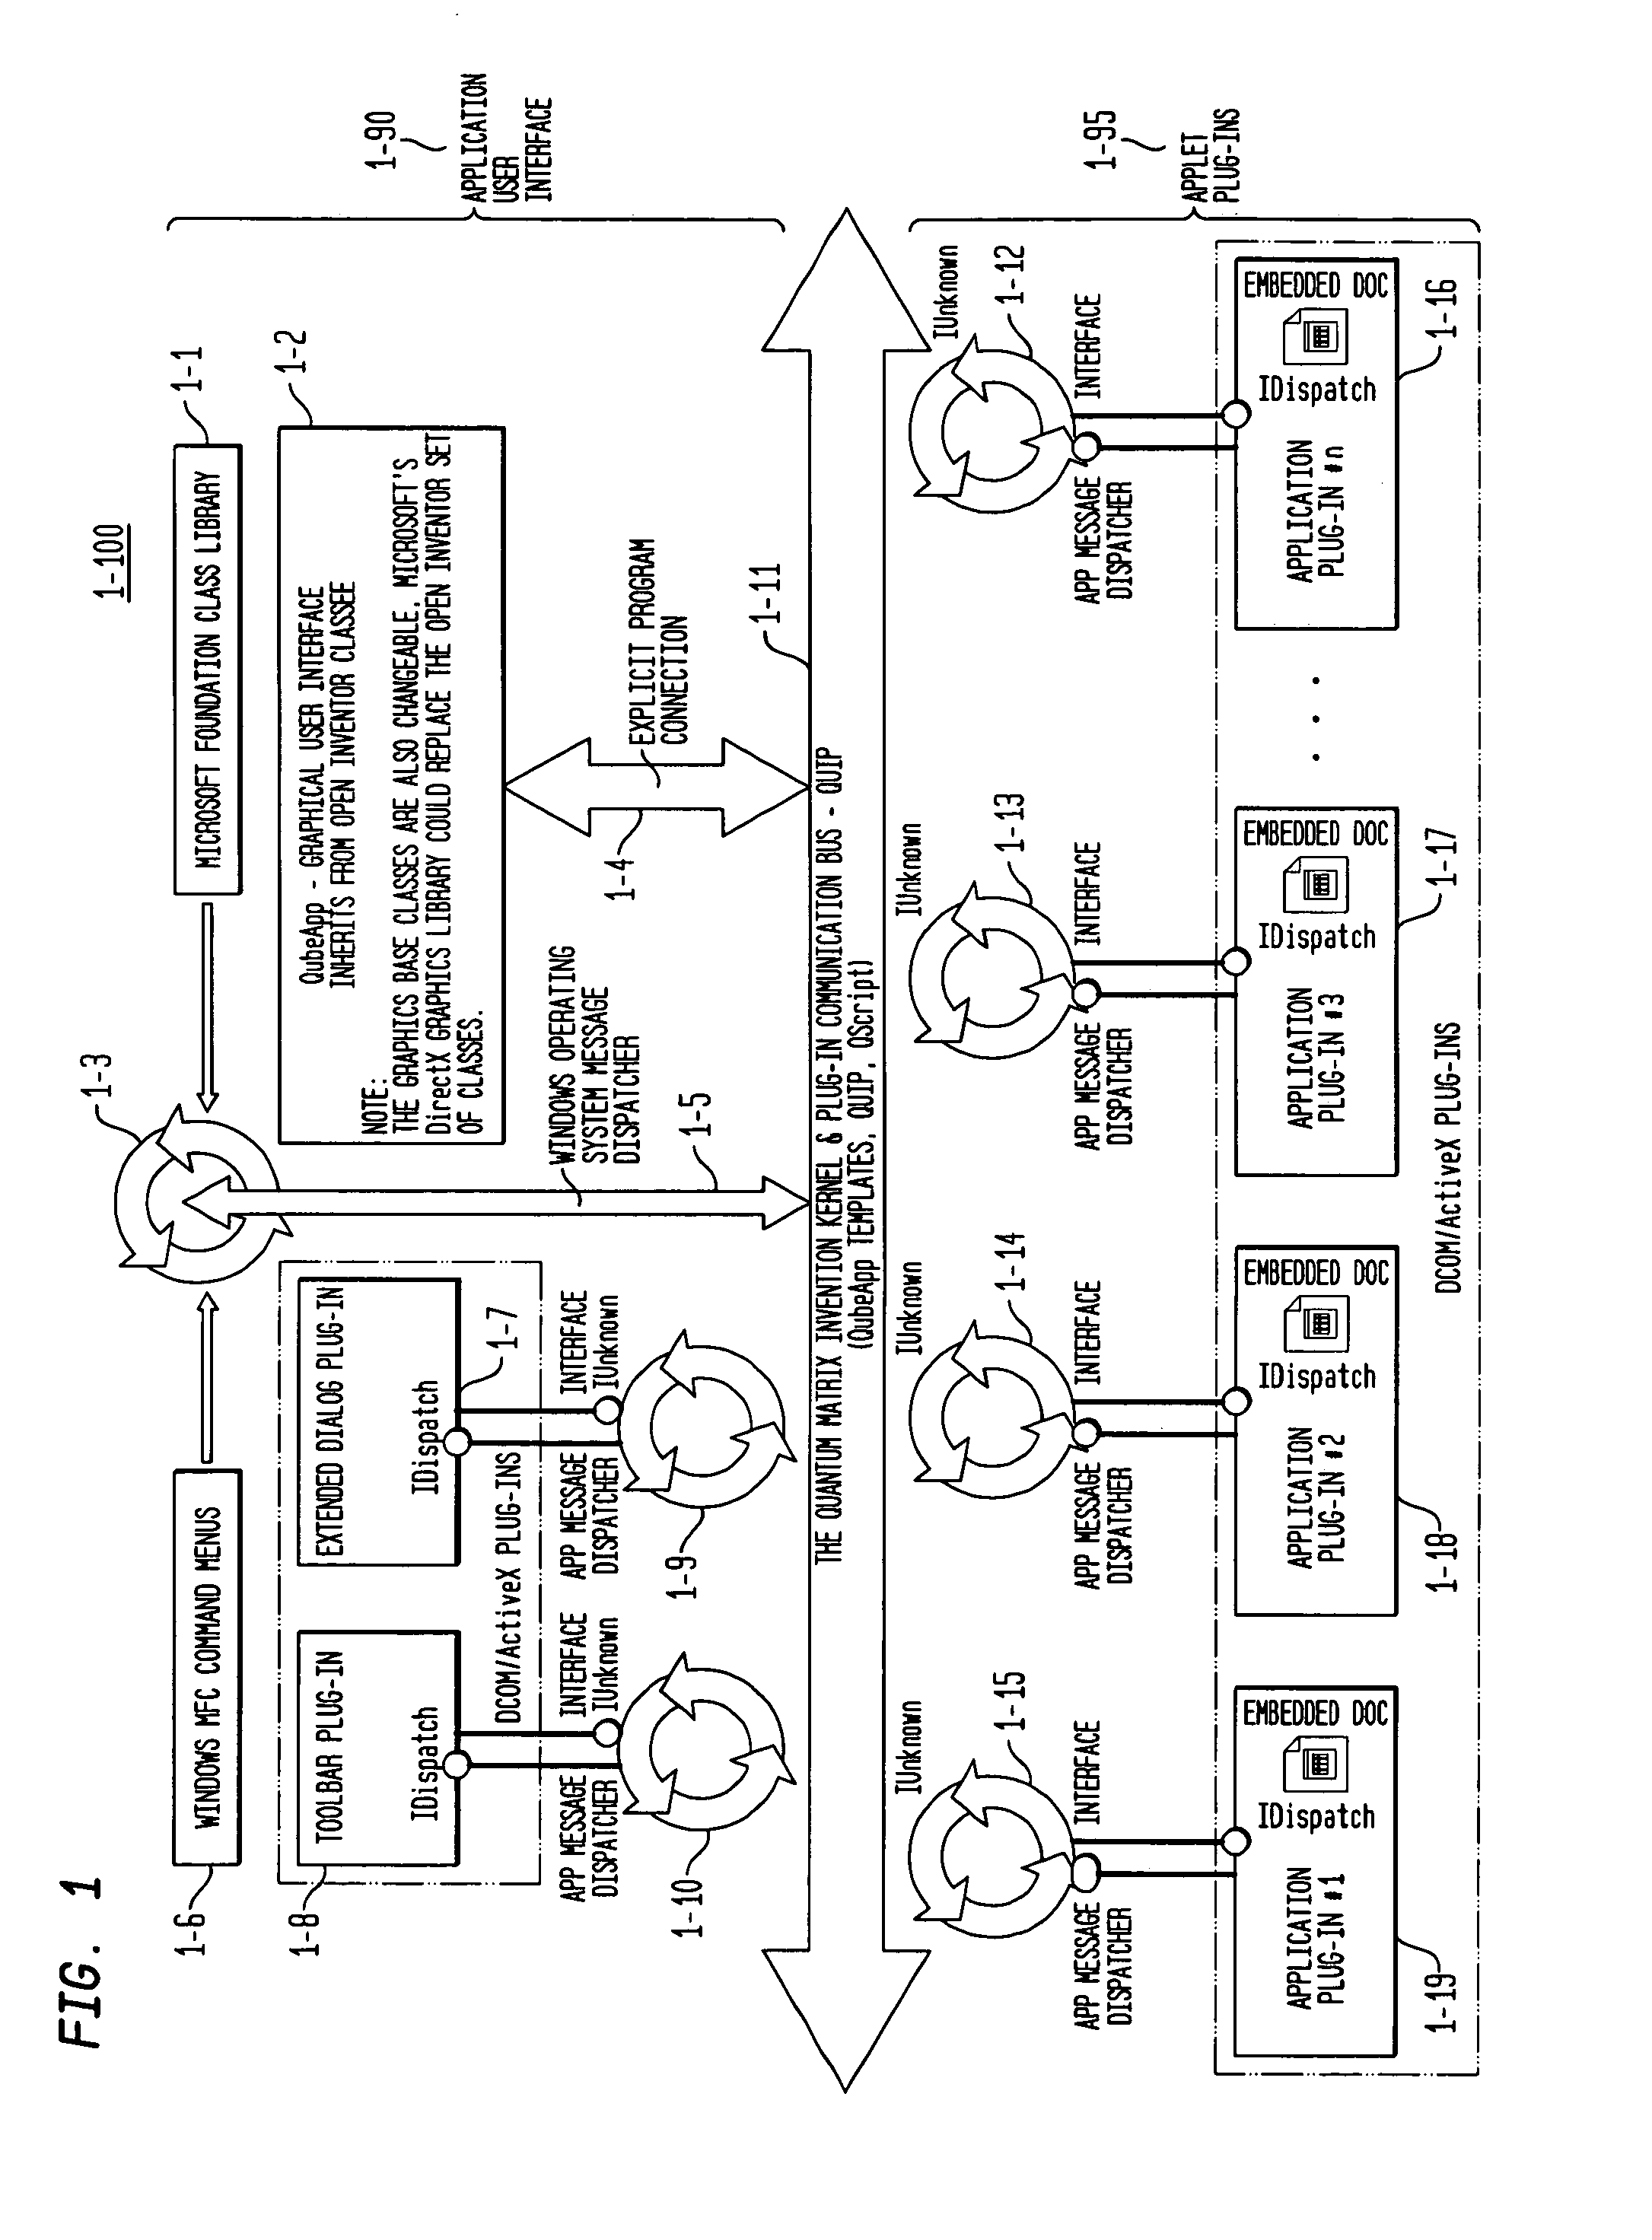 System and method for multi-dimensional organization, management, and manipulation of remote data